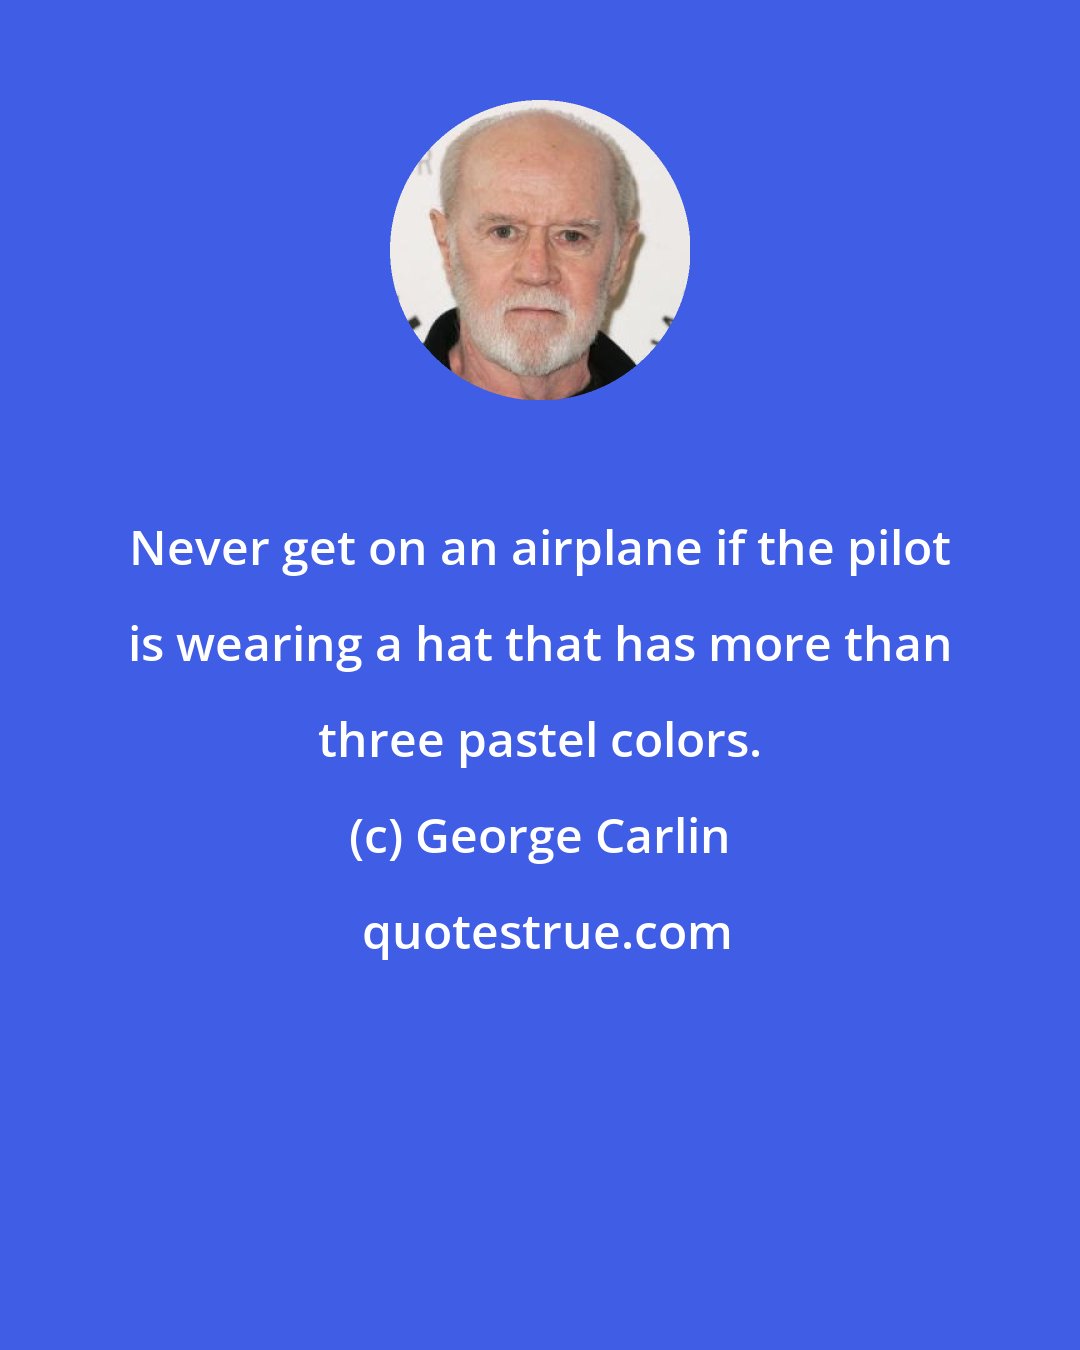 George Carlin: Never get on an airplane if the pilot is wearing a hat that has more than three pastel colors.